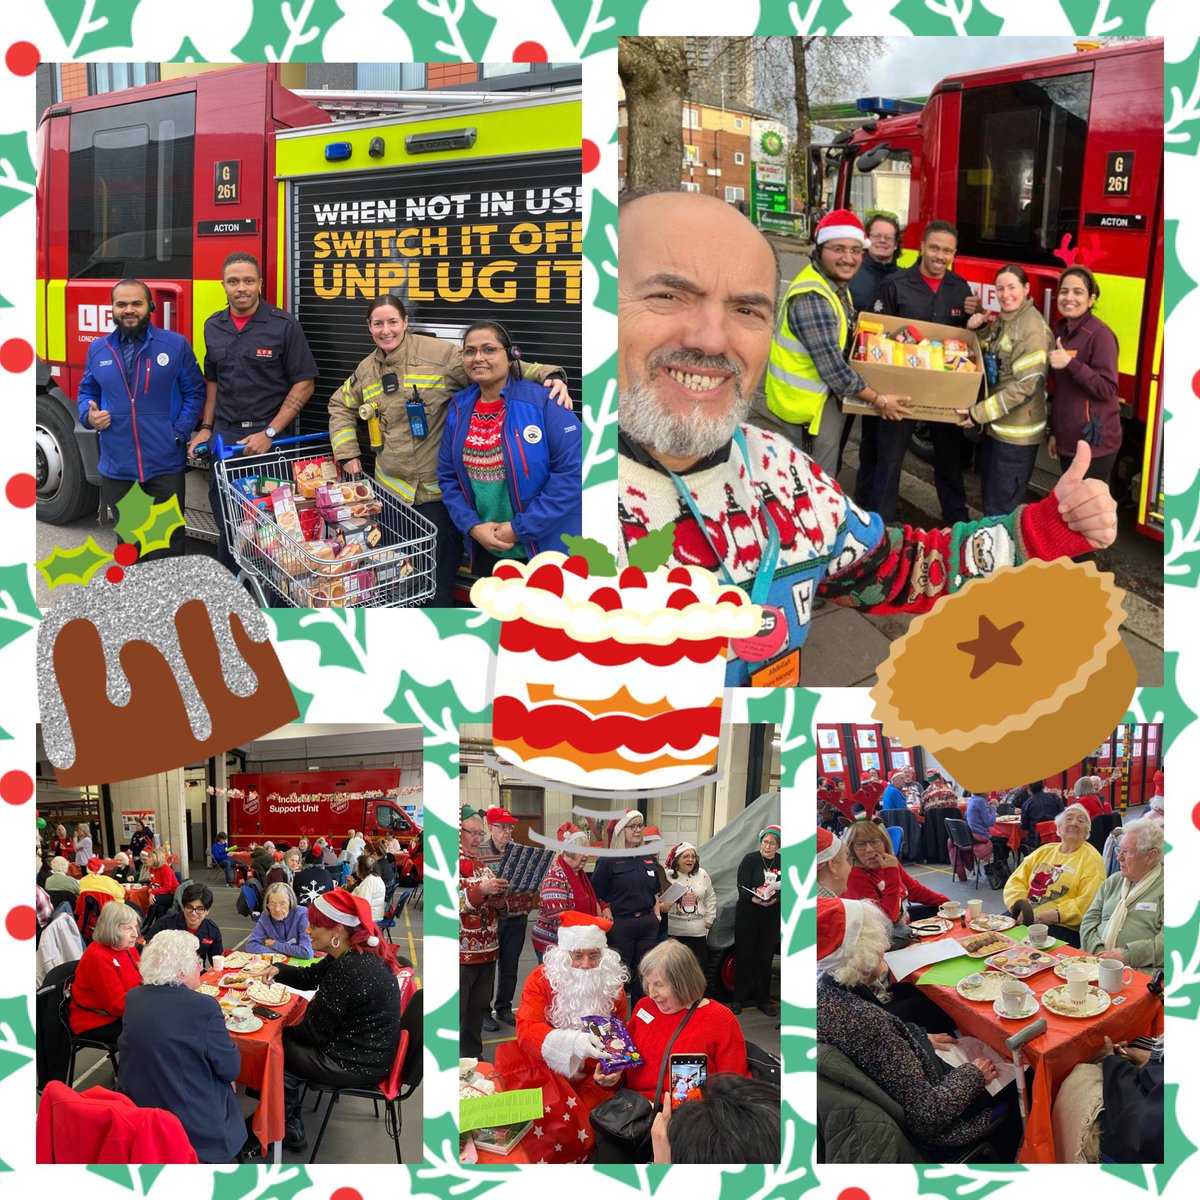 Thanks to the kind generous donations from @Tesco Acton Vale, @sainsburys Horn lane & @Morrisons Acton we were able to host a Christmas party to remember for our senior local residents. #community #togetherness #ActonFireStation #notjustfires🎄🥰